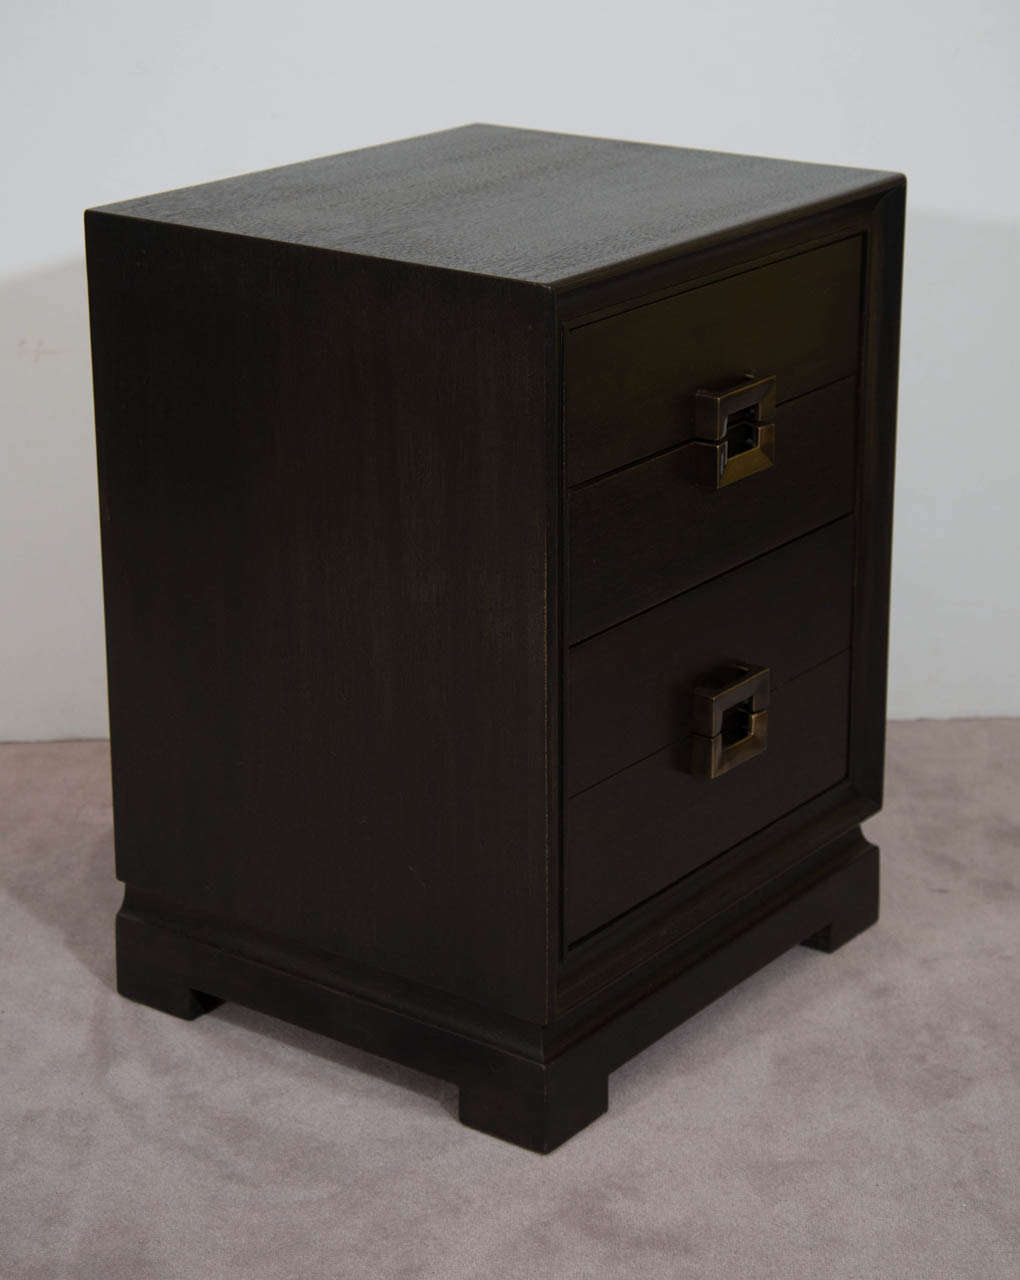 A vintage pair of lacquered mahogany three-drawer night stands with brass pulls by Red Lion Furniture Company.  During the period these night stands were made Red Lion was in collaboration with designers like Charles Eames and Eero Saarinen as well